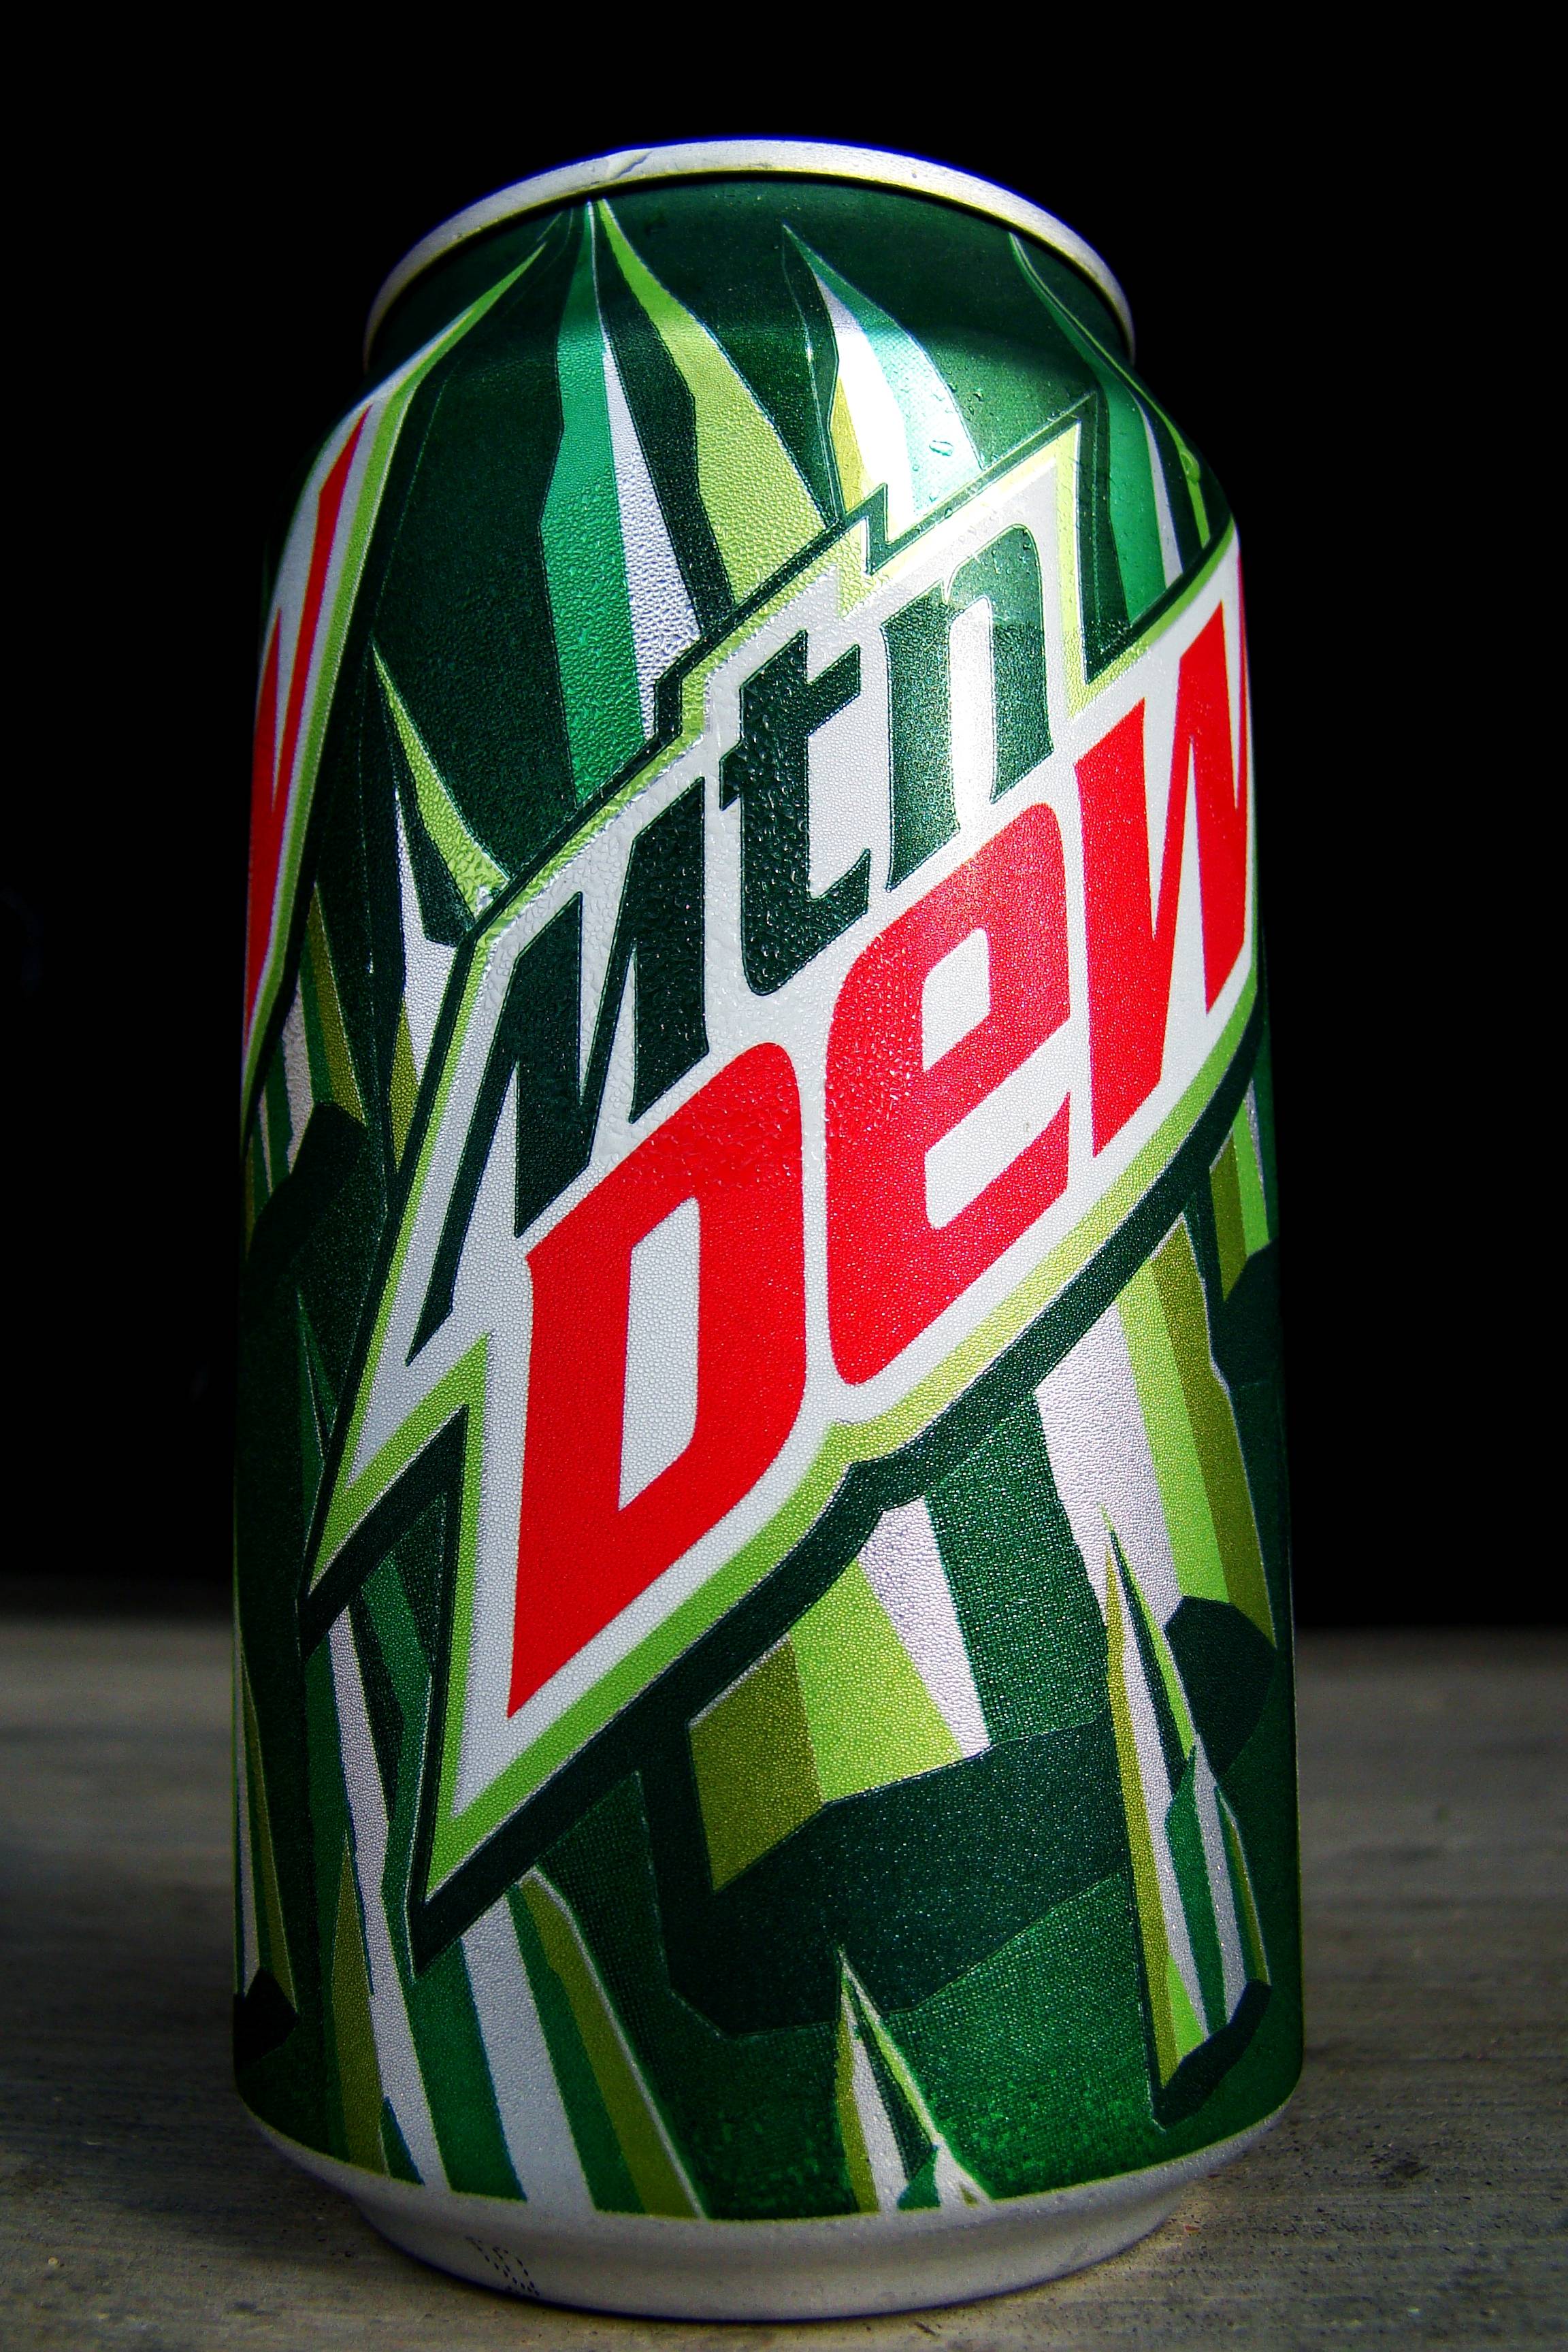 Mountain Dew Wallpapers Hd Image 31 Wide